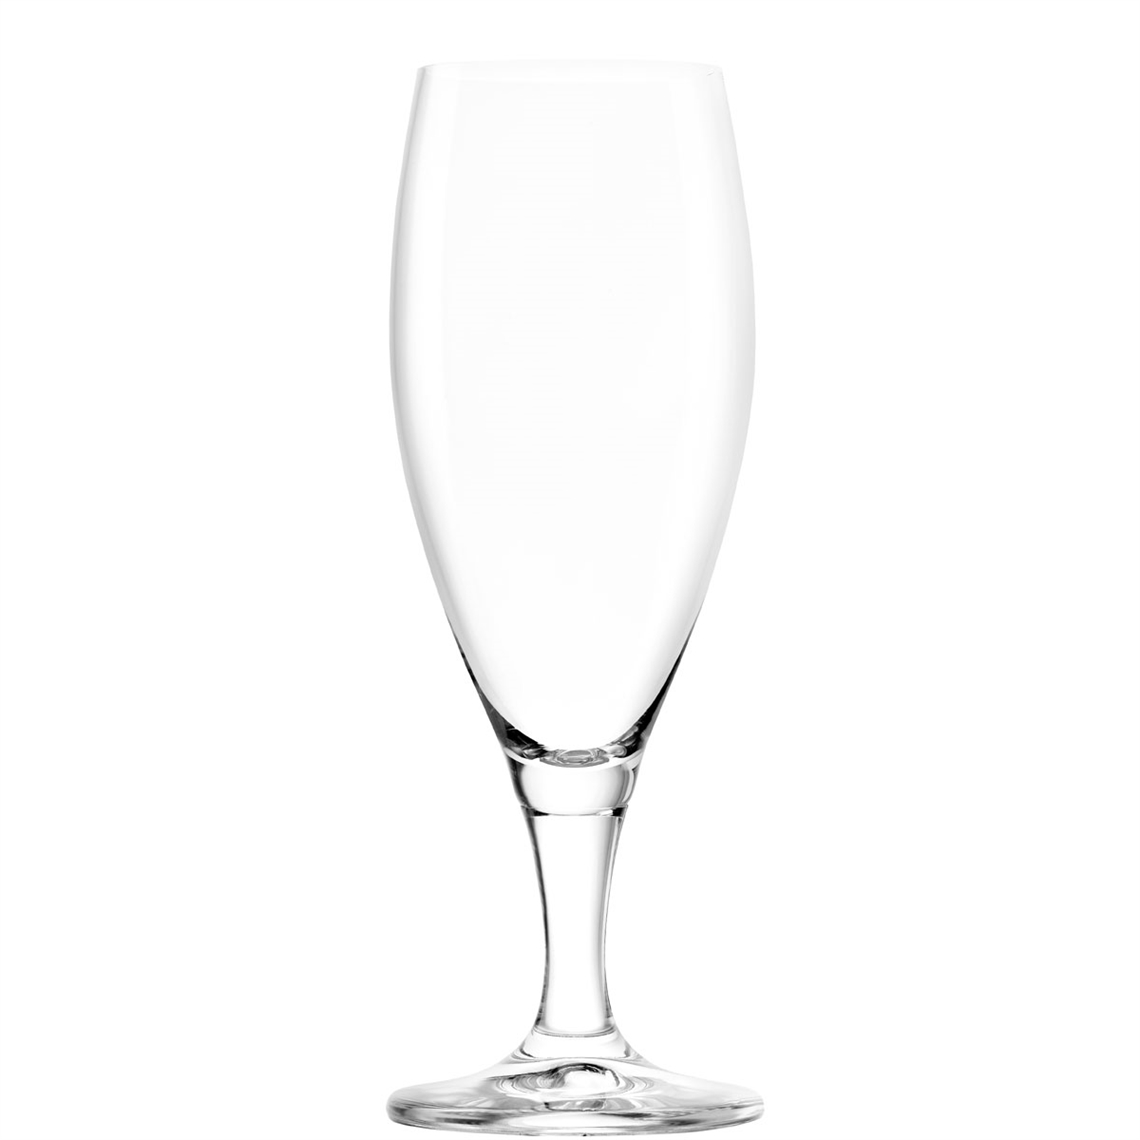 Stolzle Olly Smith Charm Collection Beer Glass - Set of 4